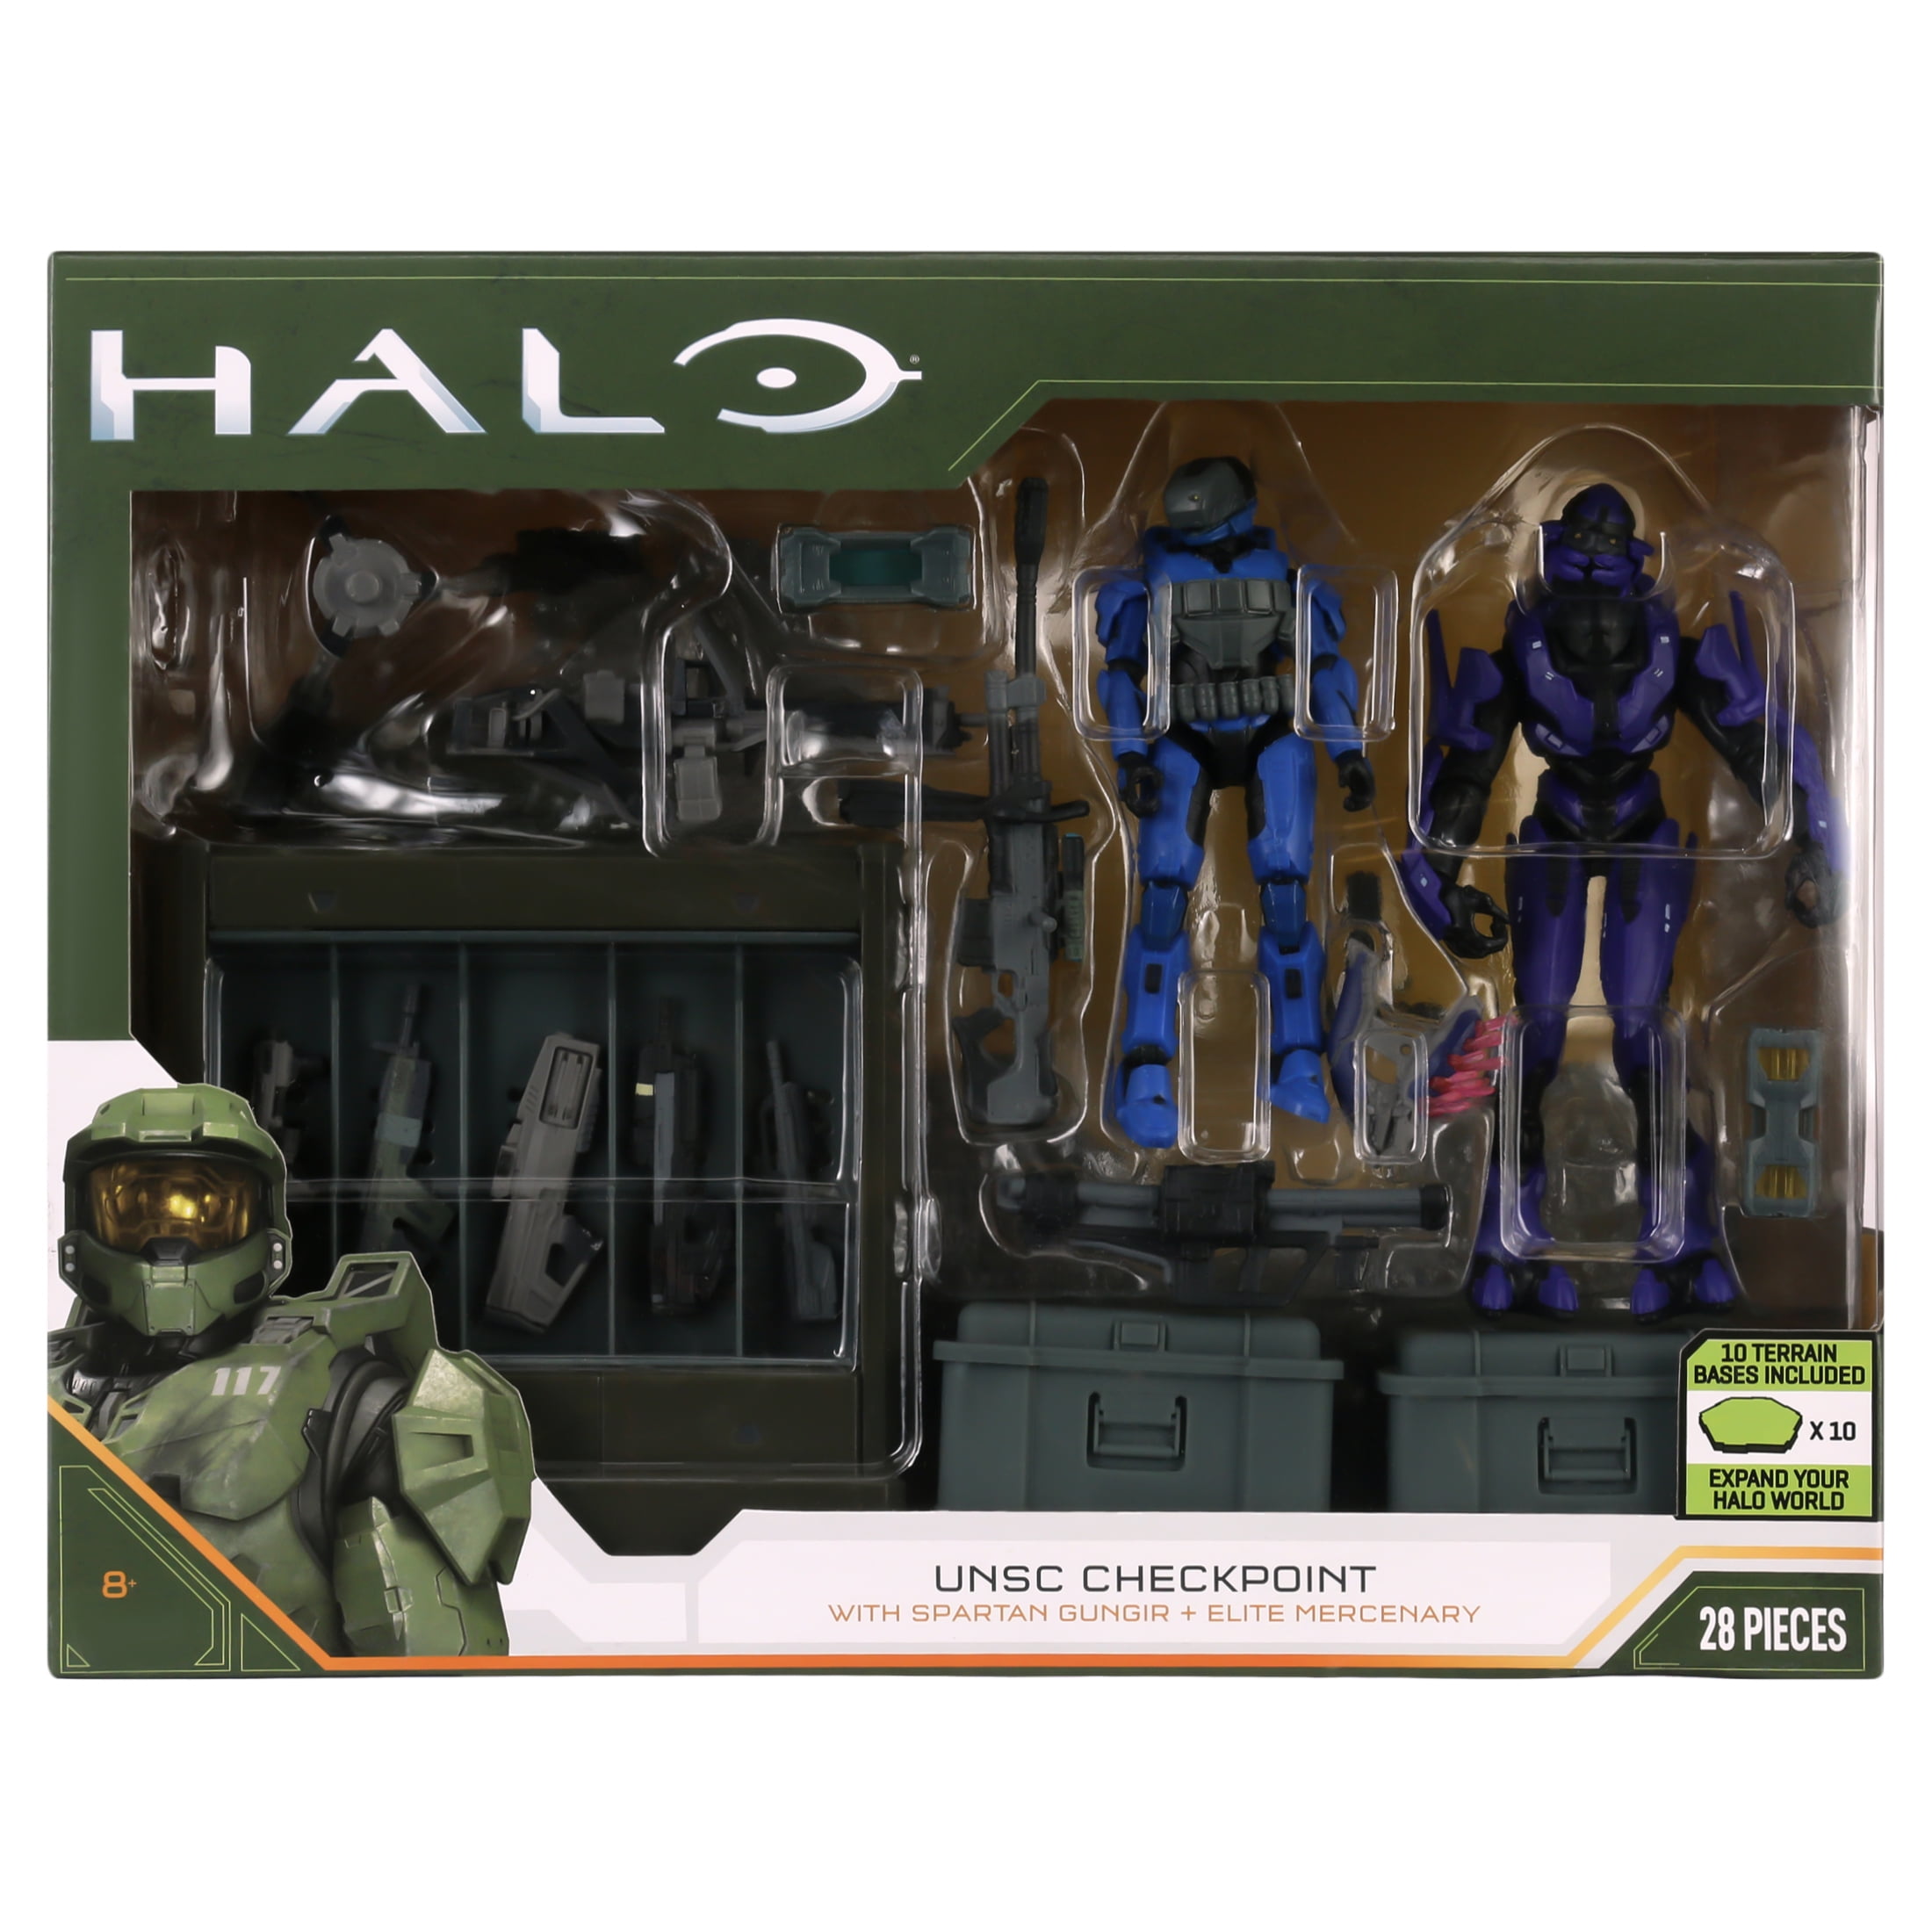 Halo 4" Figure & Vehicle Banished Ghost & Elite Warlord for sale online 